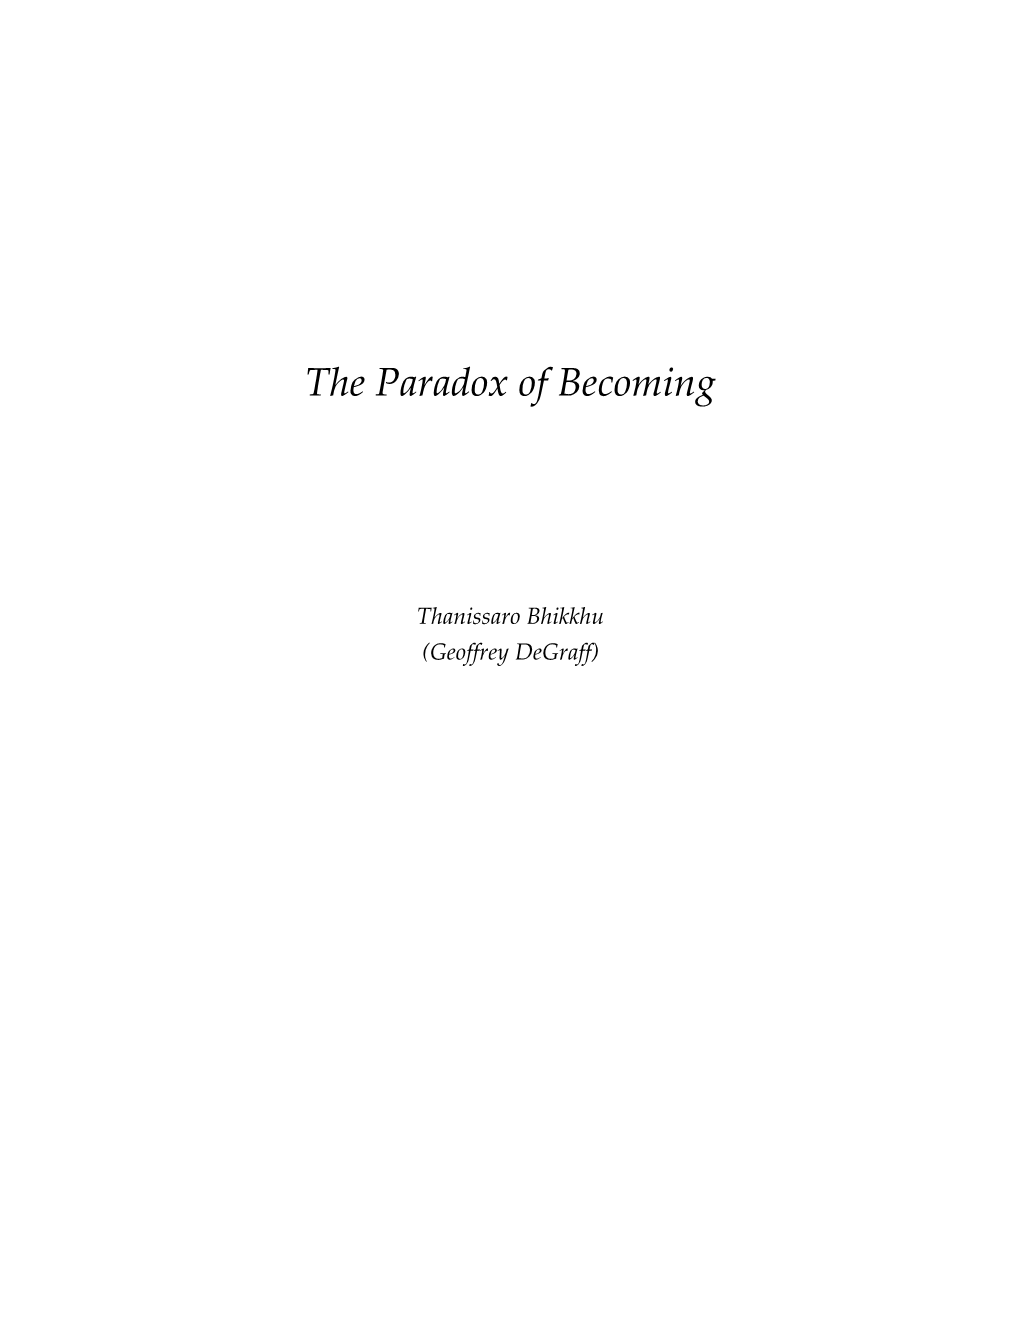 The Paradox of Becoming